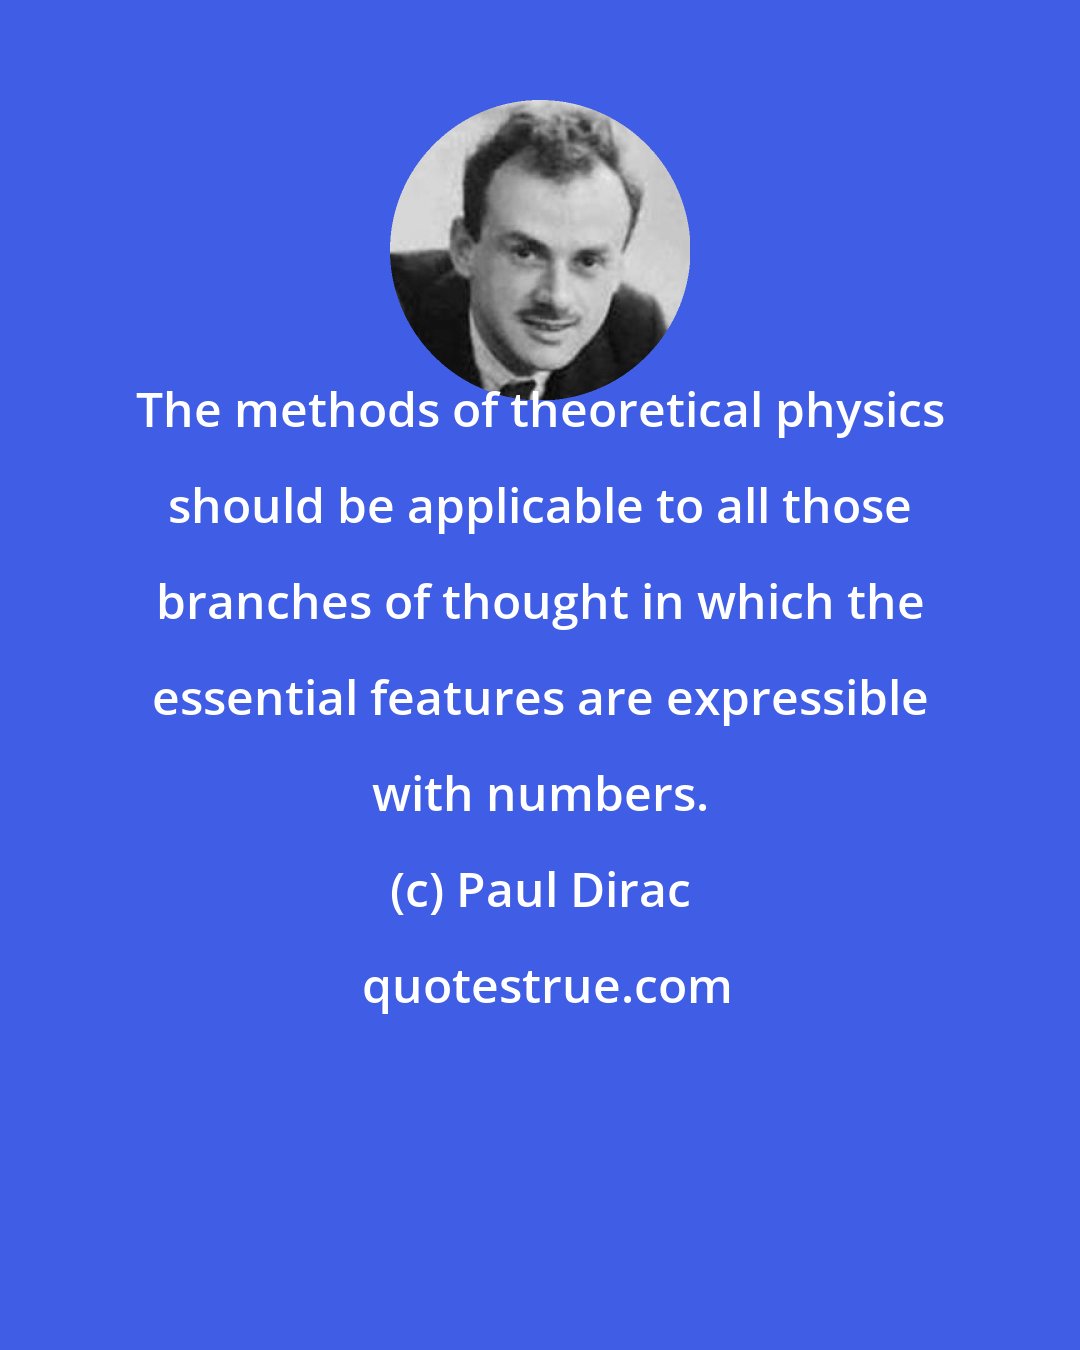 Paul Dirac: The methods of theoretical physics should be applicable to all those branches of thought in which the essential features are expressible with numbers.